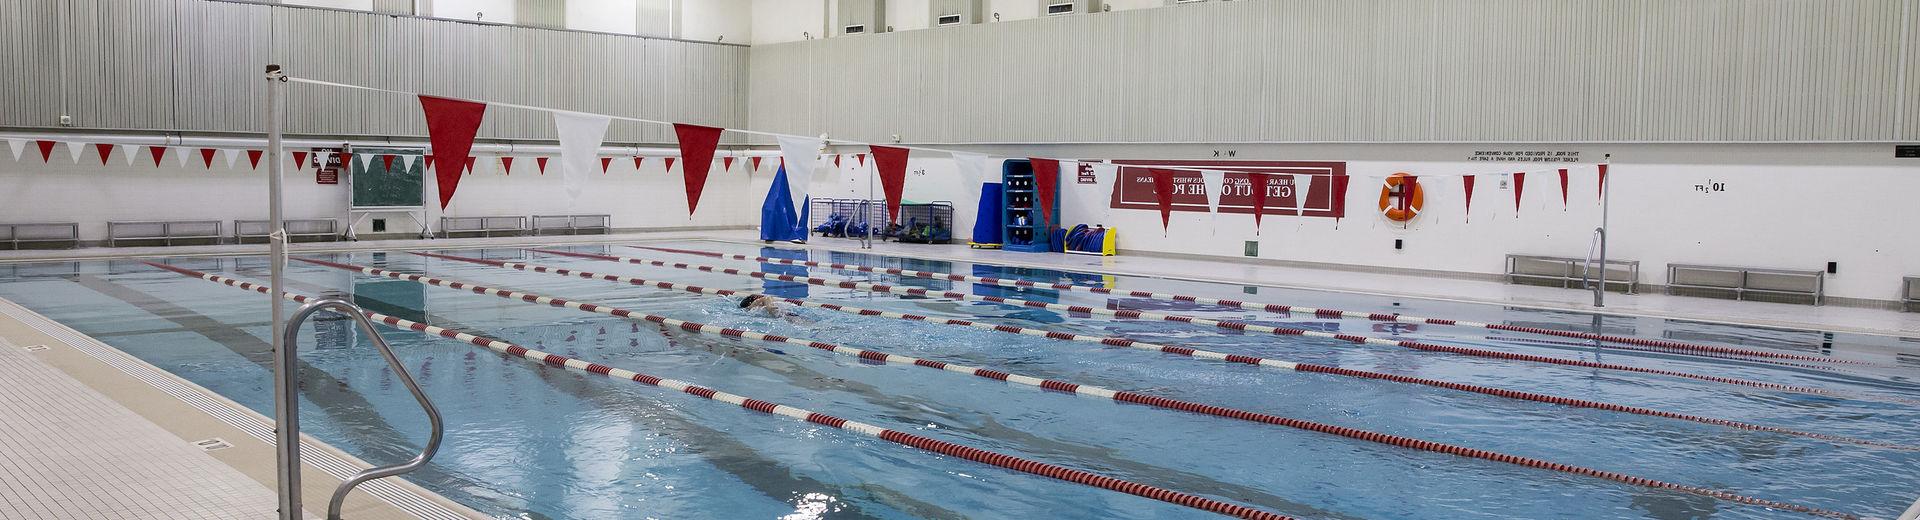 Temple Campus Recreation pool 30 located in Pearson and McGonigle Halls 